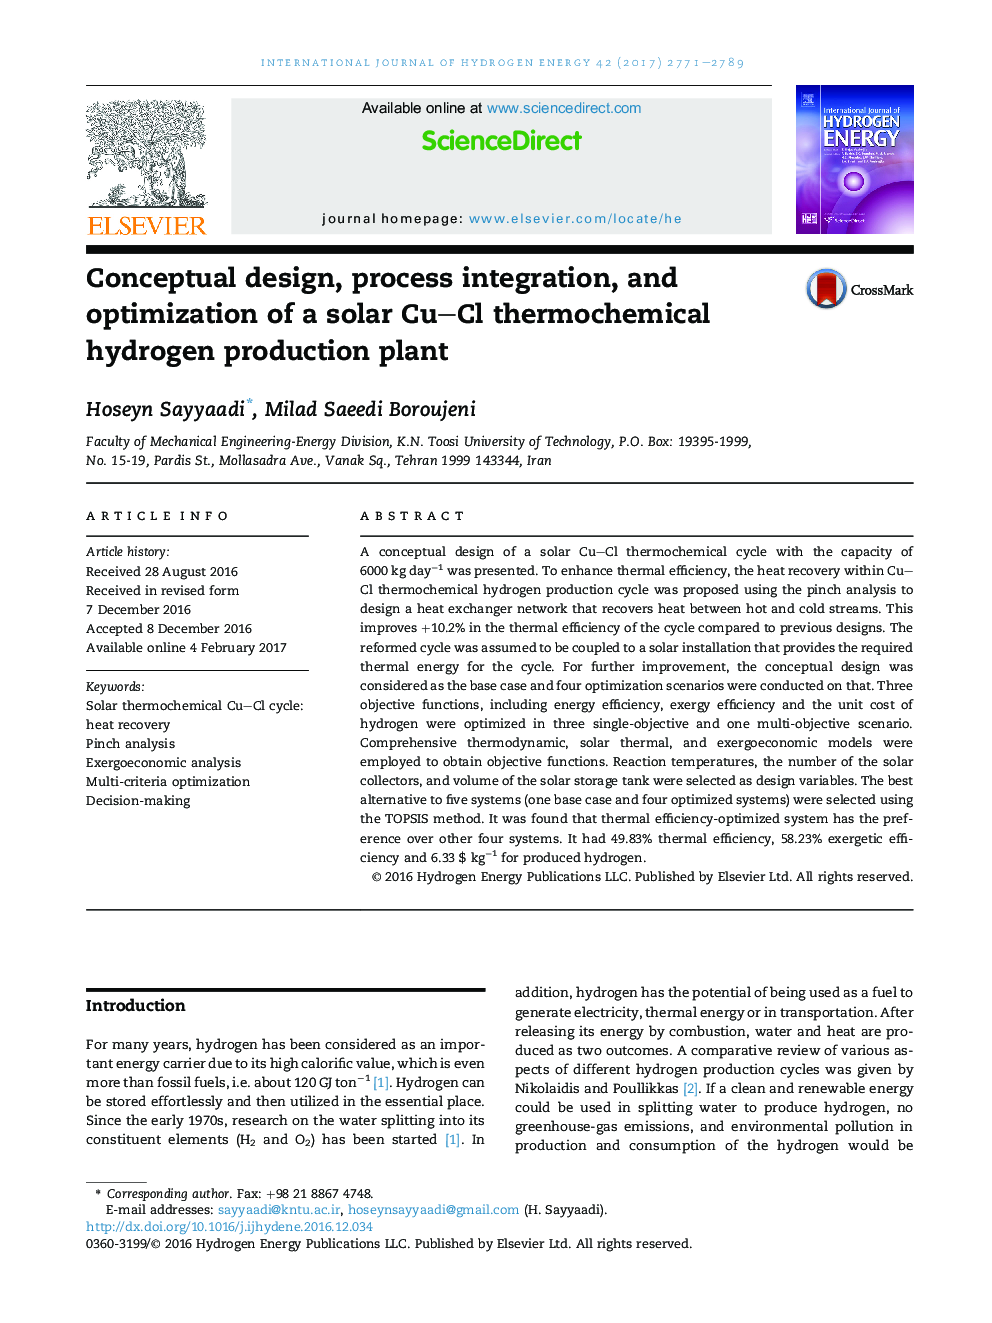 Conceptual design, process integration, and optimization of a solar CuCl thermochemical hydrogen production plant